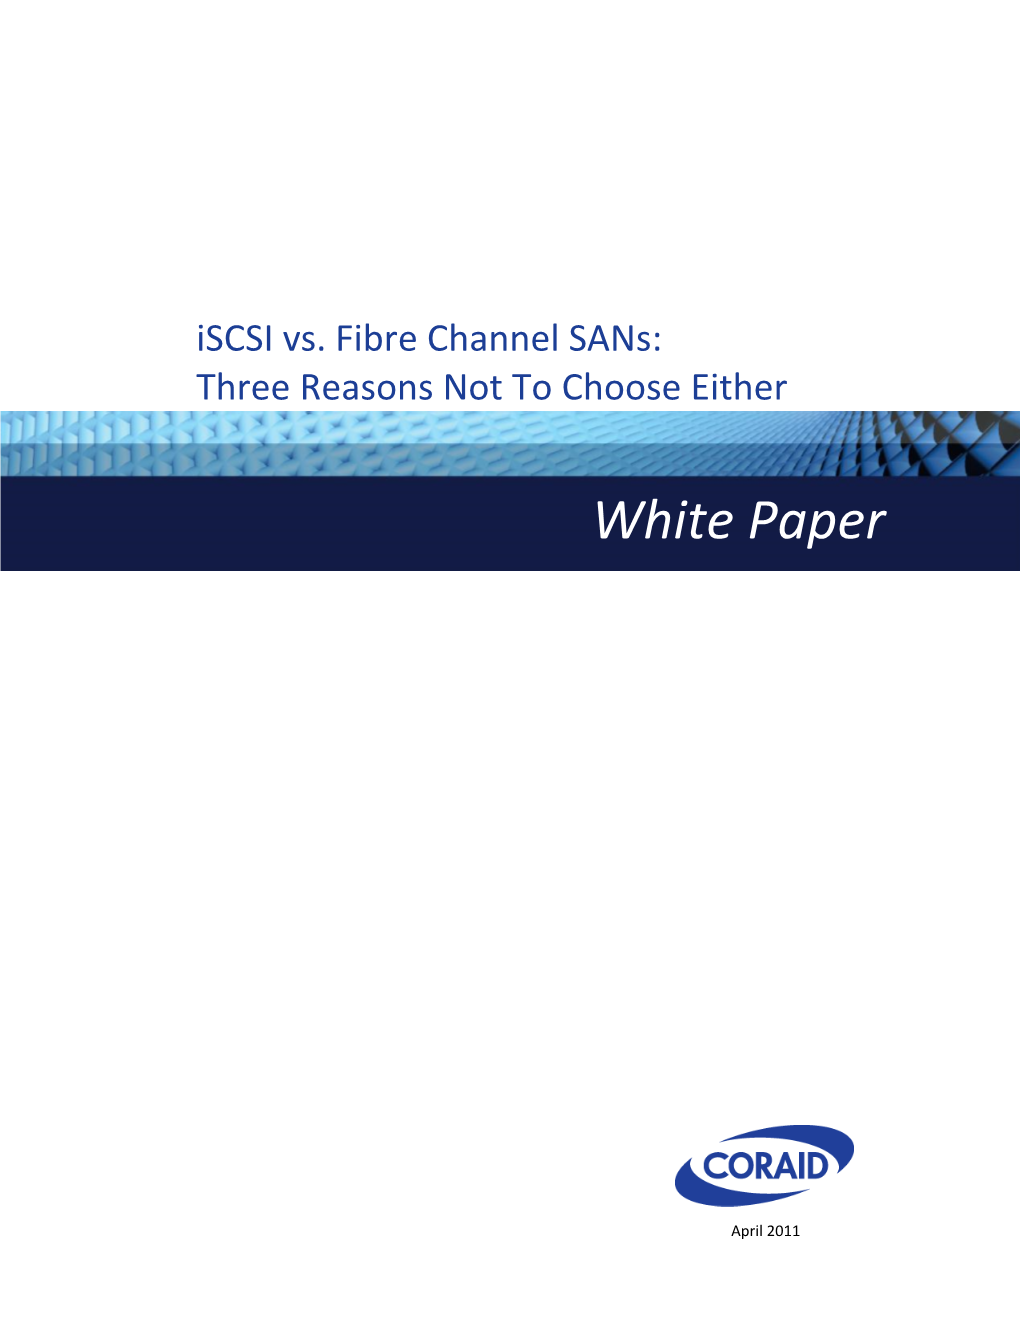 Iscsi Vs. Fibre Channel Sans: Three Reasons Not to Choose Either